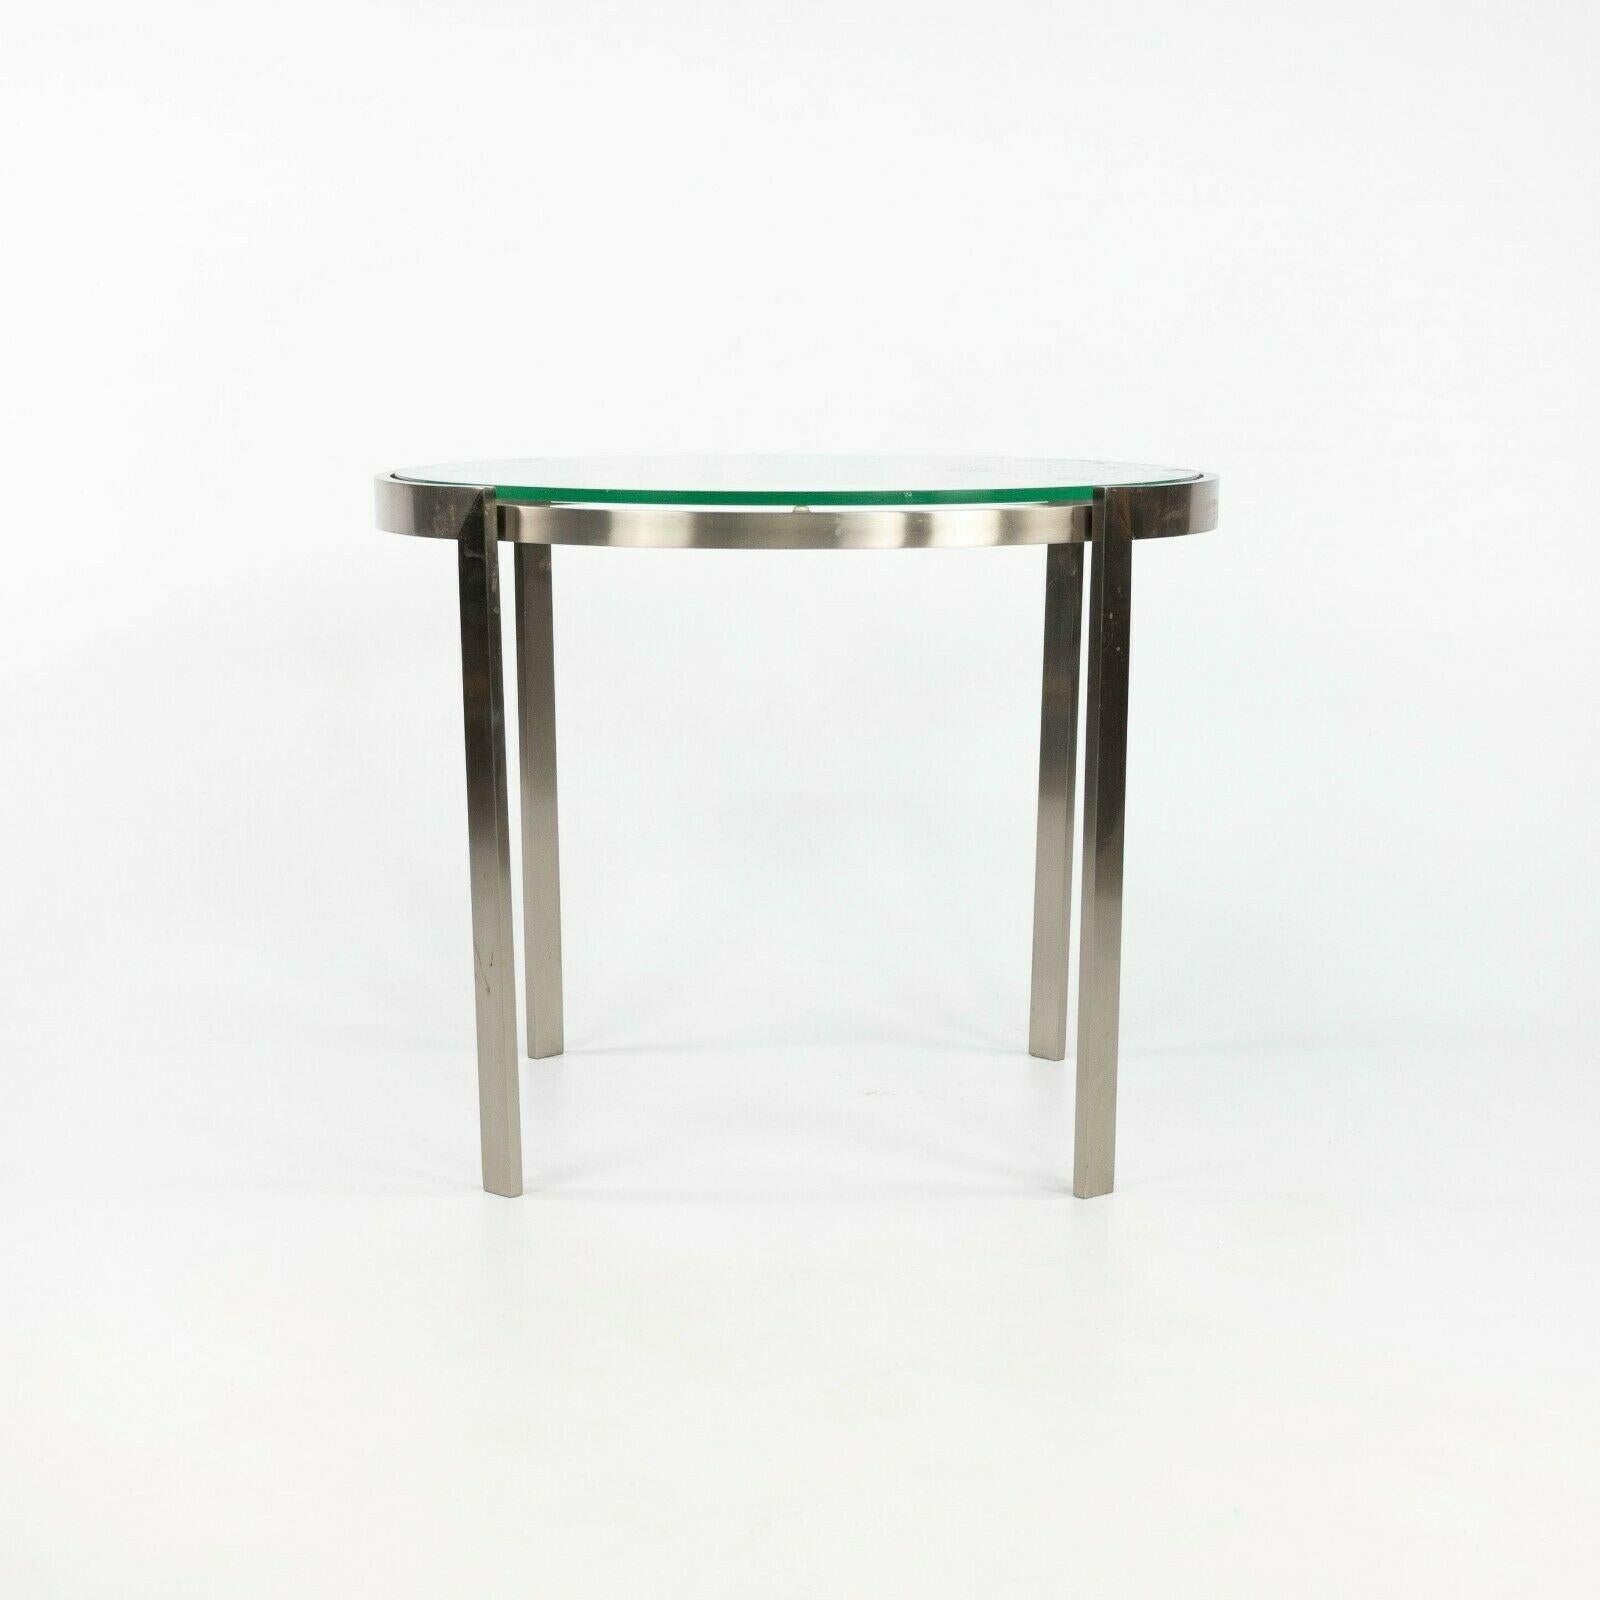 2010s Geiger Metal Series Matte Stainless Steel and Glass End Table / Side Table In Good Condition For Sale In Philadelphia, PA